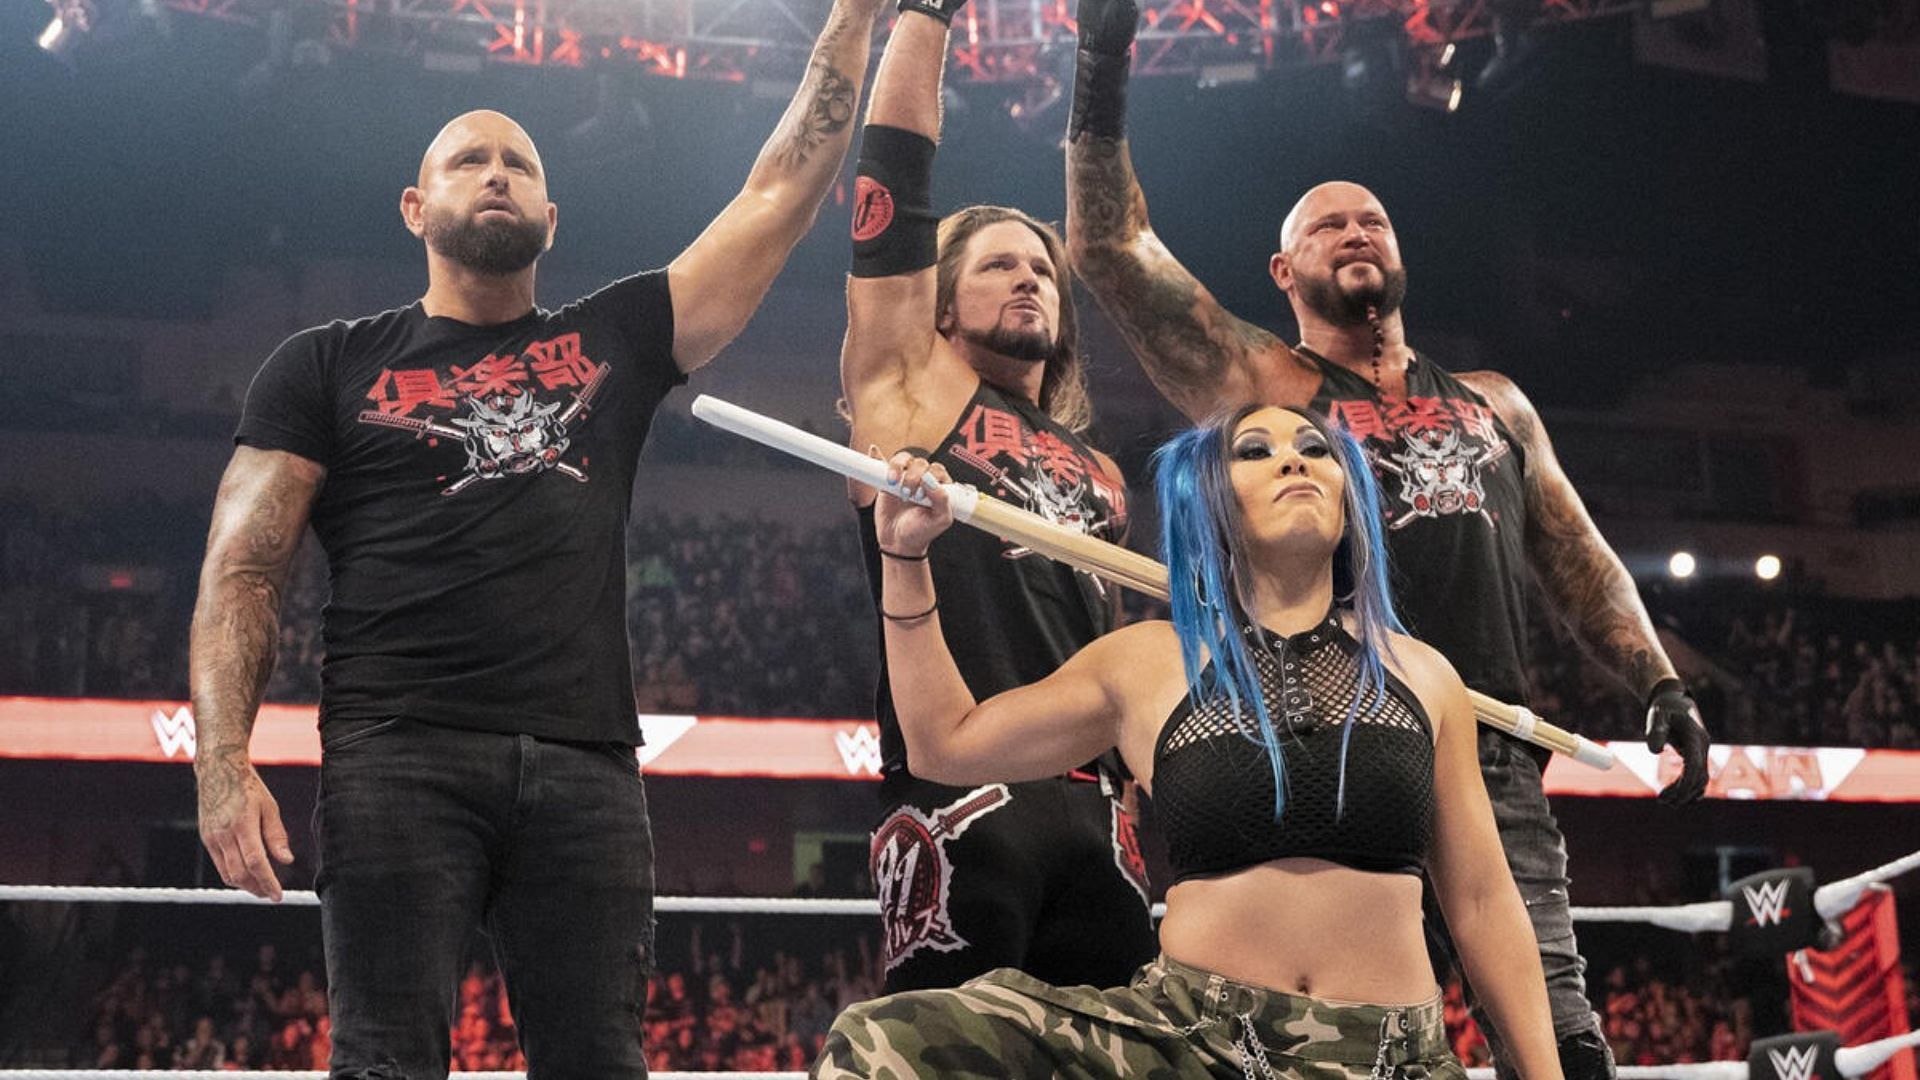 The WWE rendition of Bullet Club features (from left to right) Karl Anderson, AJ Styles, Mia Yim and Luke Gallows [Credit: WWE]